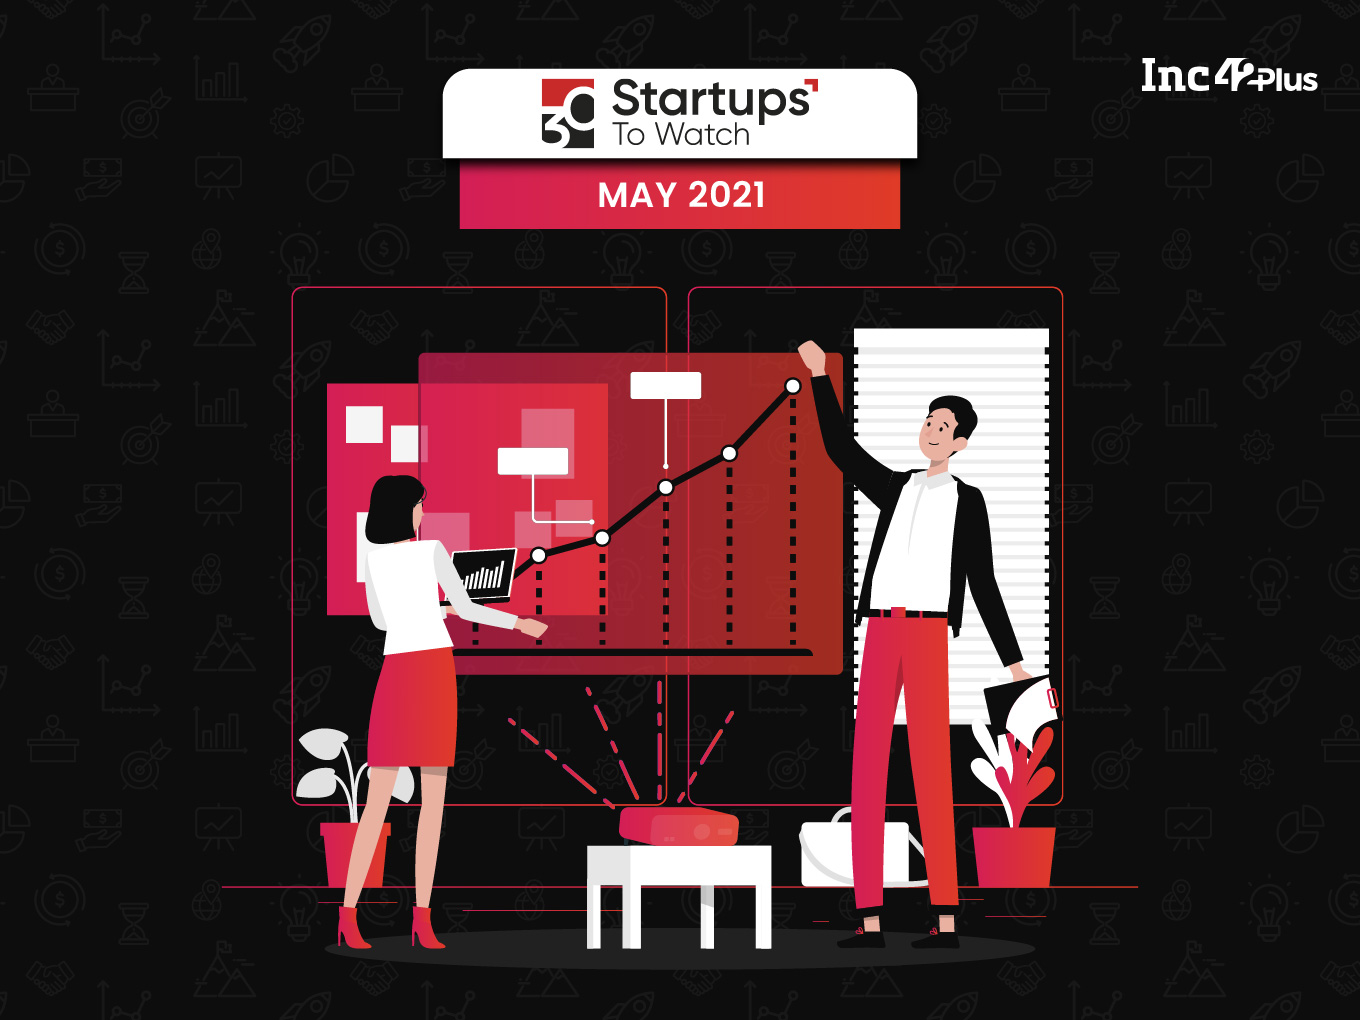 30 Startups To Watch: The Startups That Caught Our Eye In May 2021